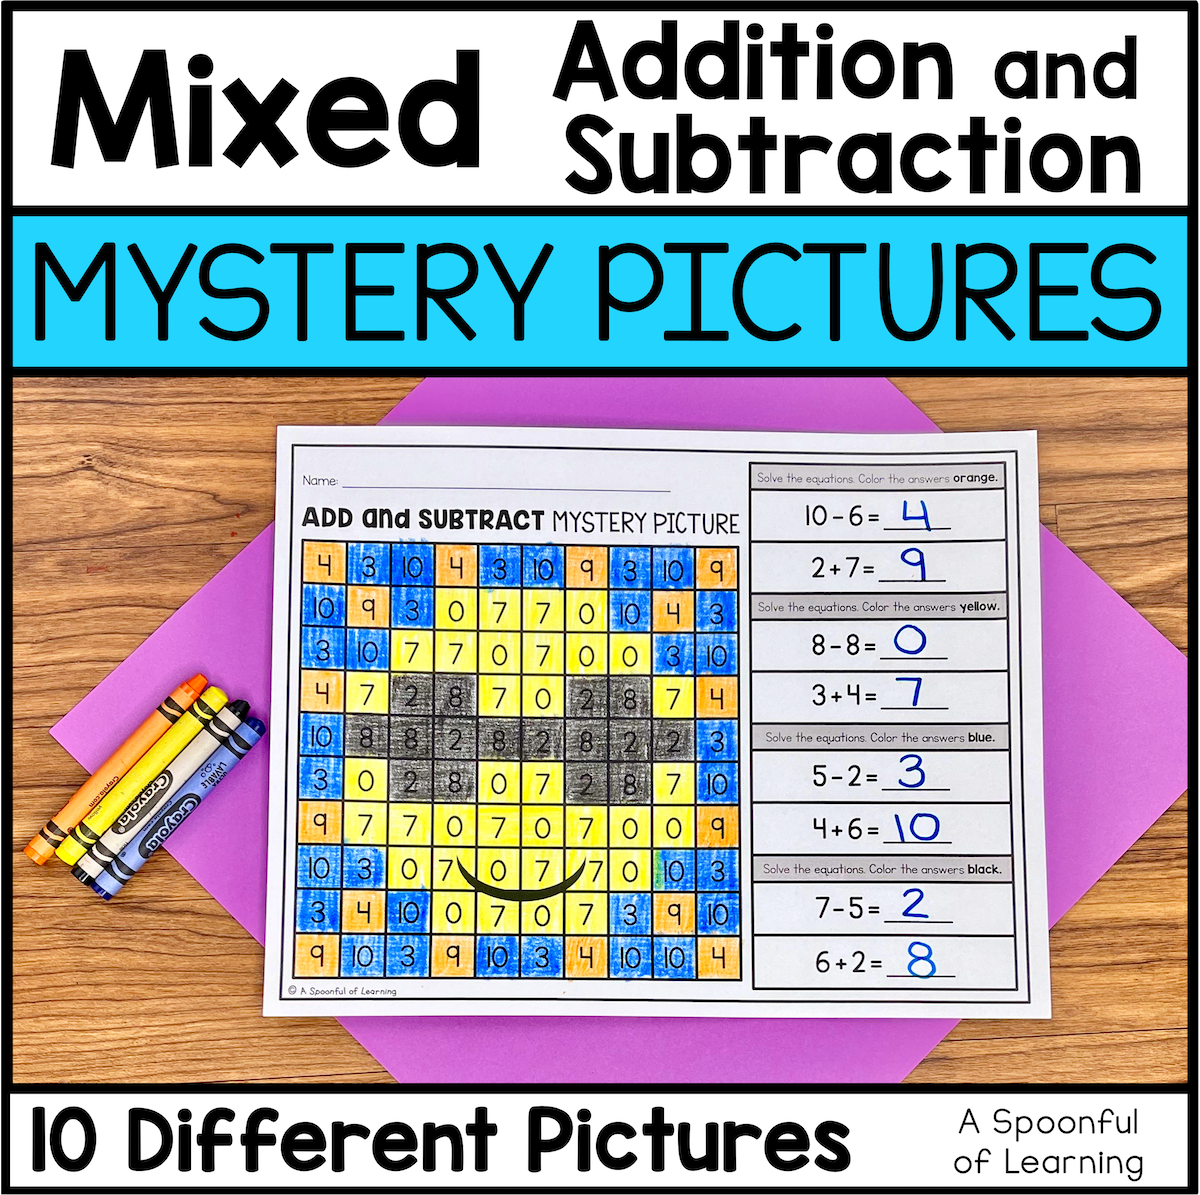 mixed-addition-and-subtraction-mystery-pictures